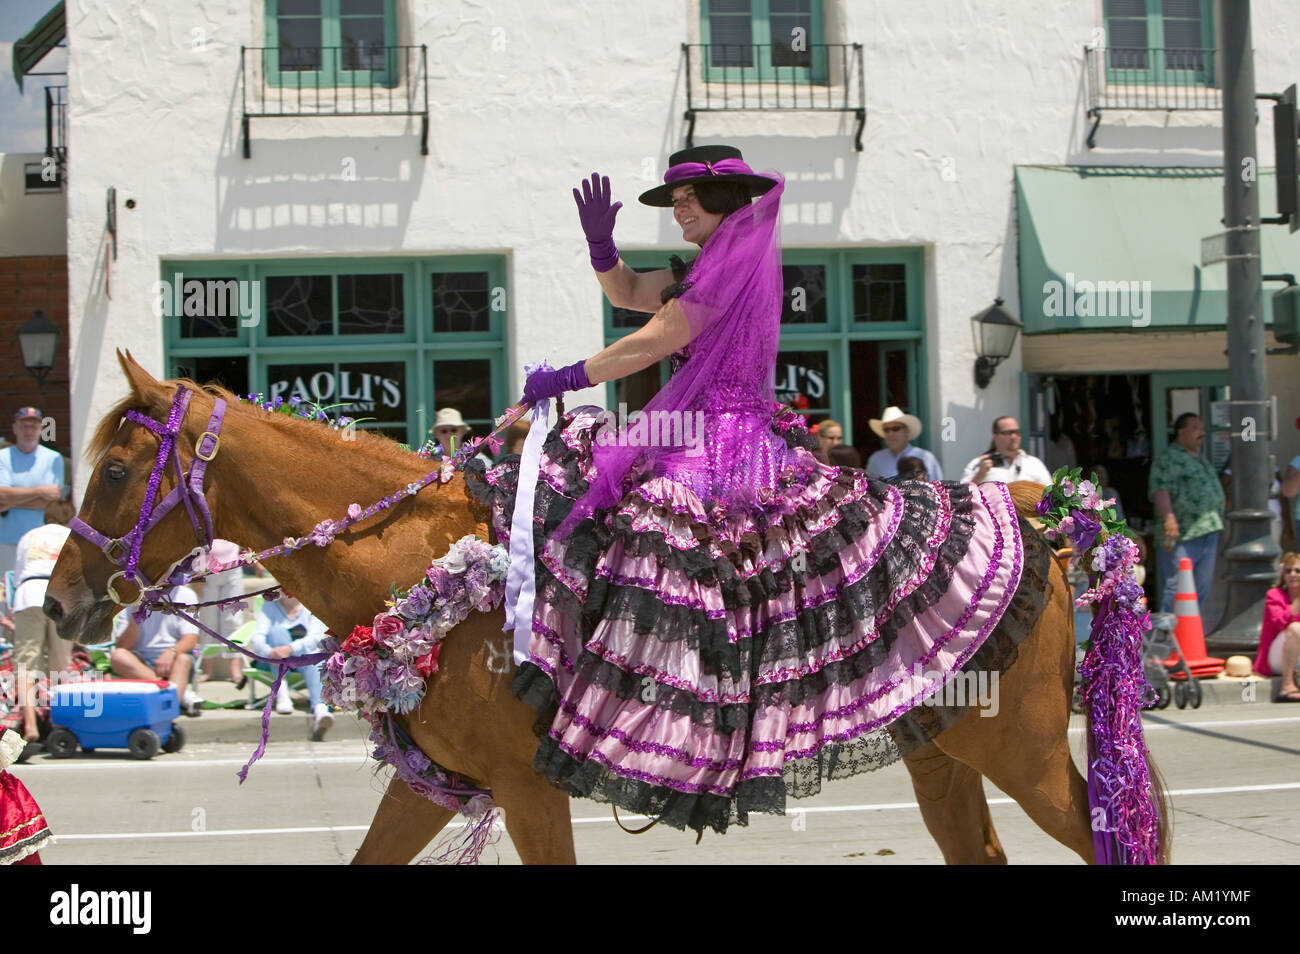 Woman with purple Spanish dress riding horse during opening day parade down State Street Santa Barbara CA Old Spanish Days Stock Photo